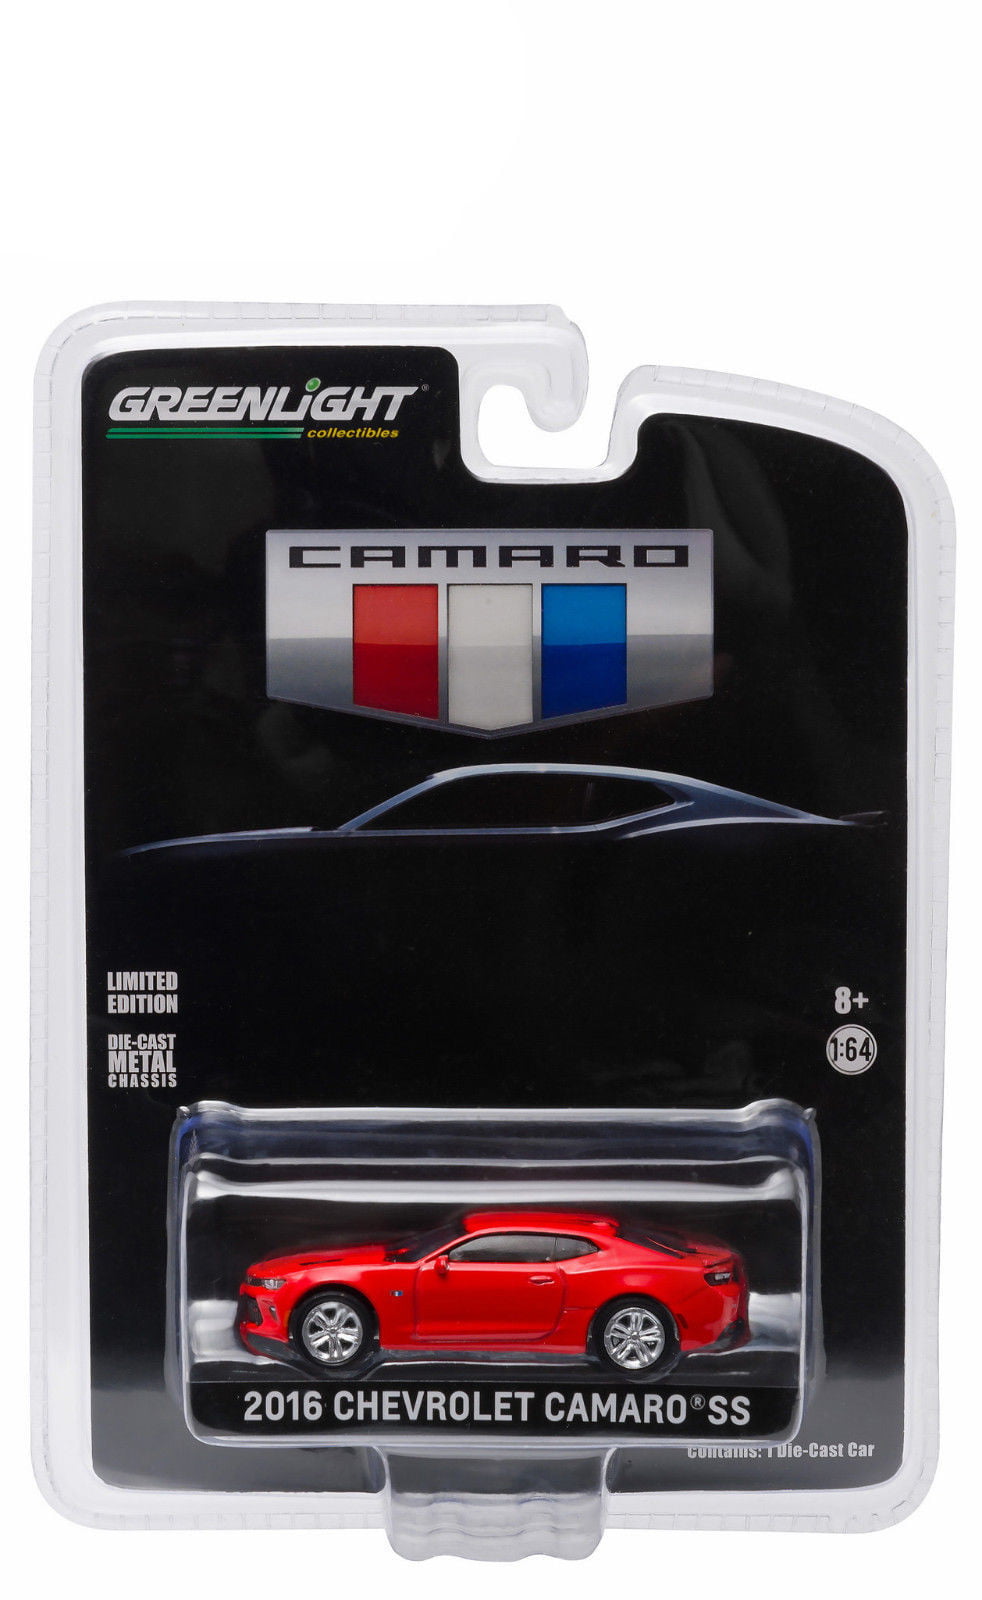 GREENLIGHT 2016 CHEVROLET CAMARO SS RED ALL NEW UNVEILING EDITION 1/64 CAR 29861 